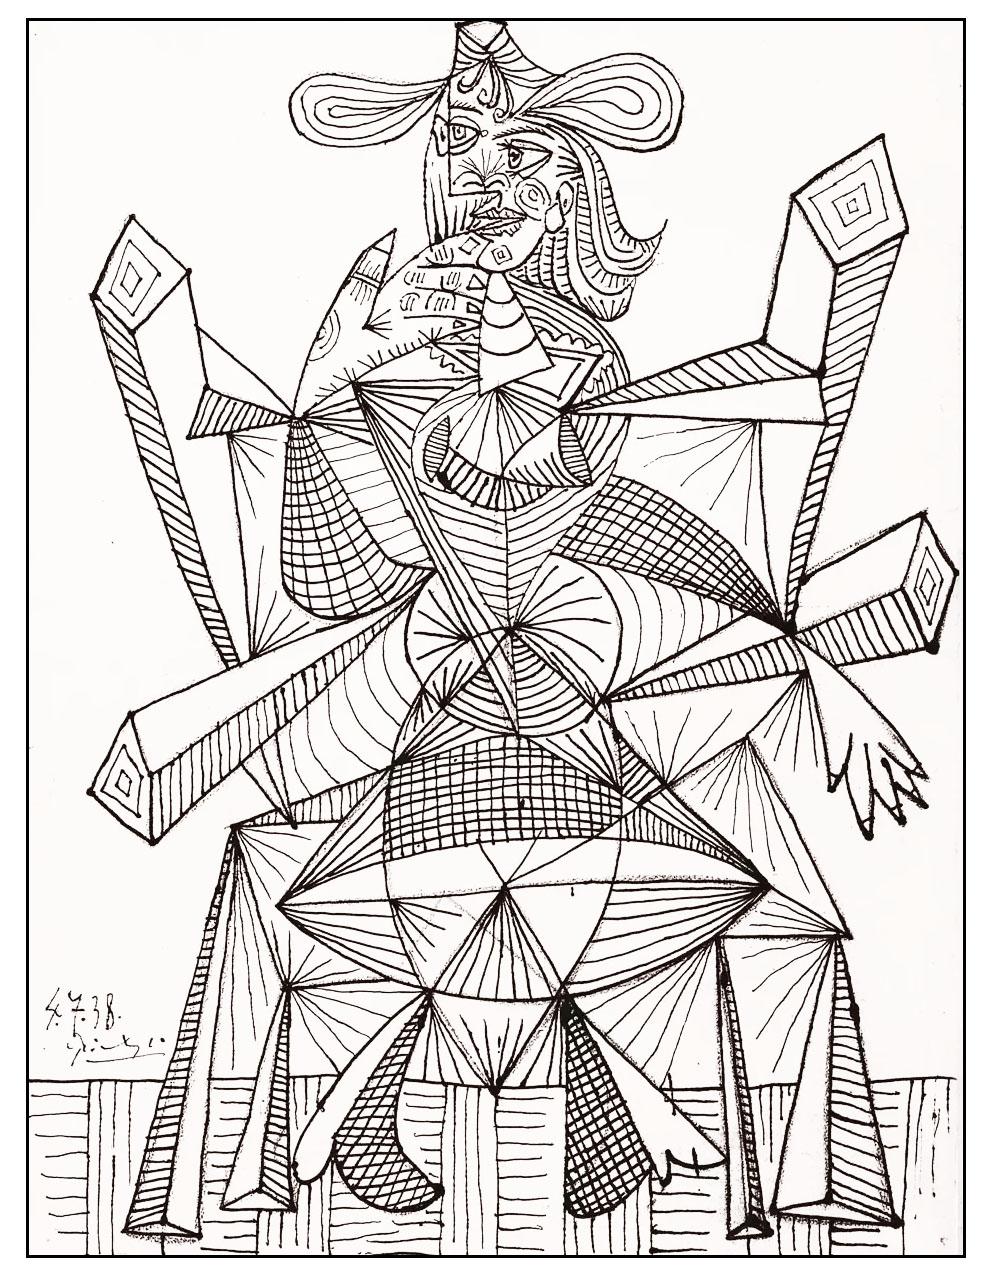 A drawing by the great Pablo Picasso, perfect for an artistic coloring page !